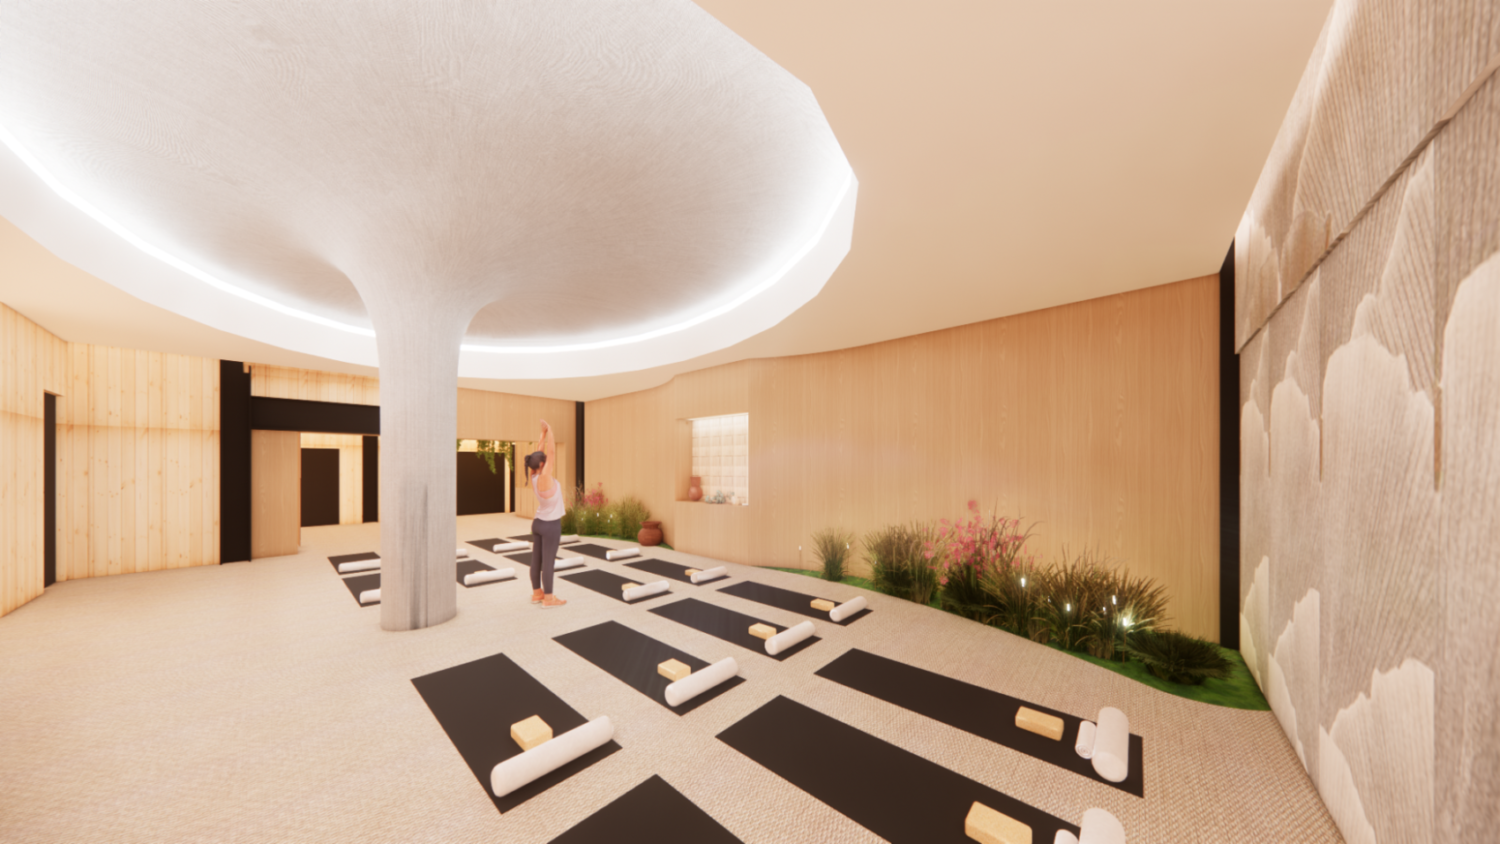 Yoga and relaxation studio, Interior Design, Mental Health & Wellness Centre in Vancouver British Columbia, by Cutler